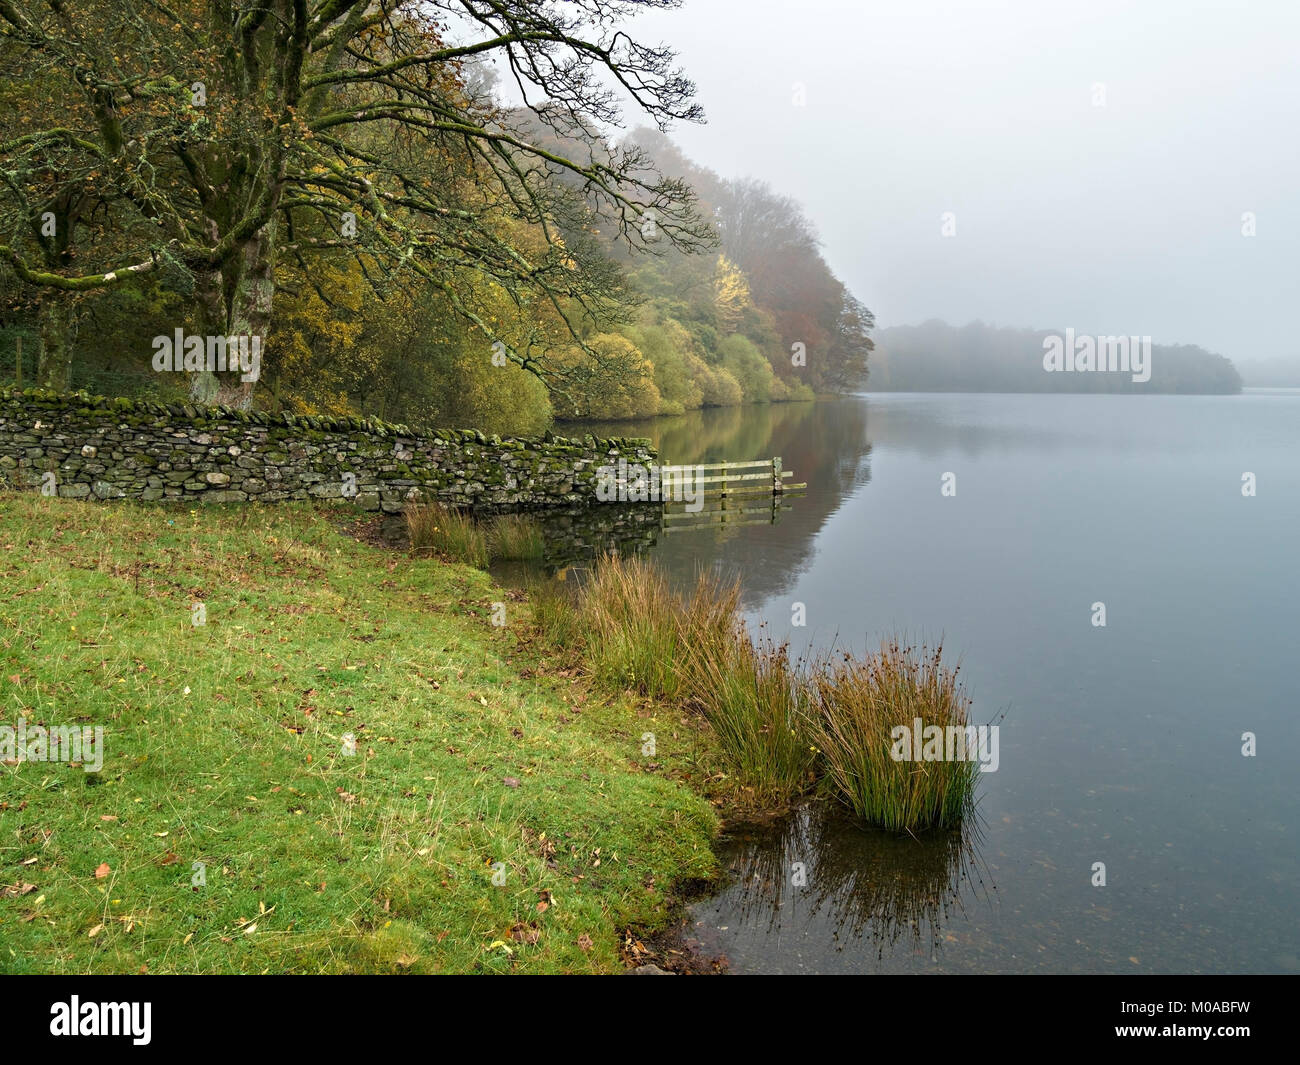 Loweswater lake and shoreline on a calm Autumn day, English Lake District National Park, Cumbria, England, UK. Stock Photo